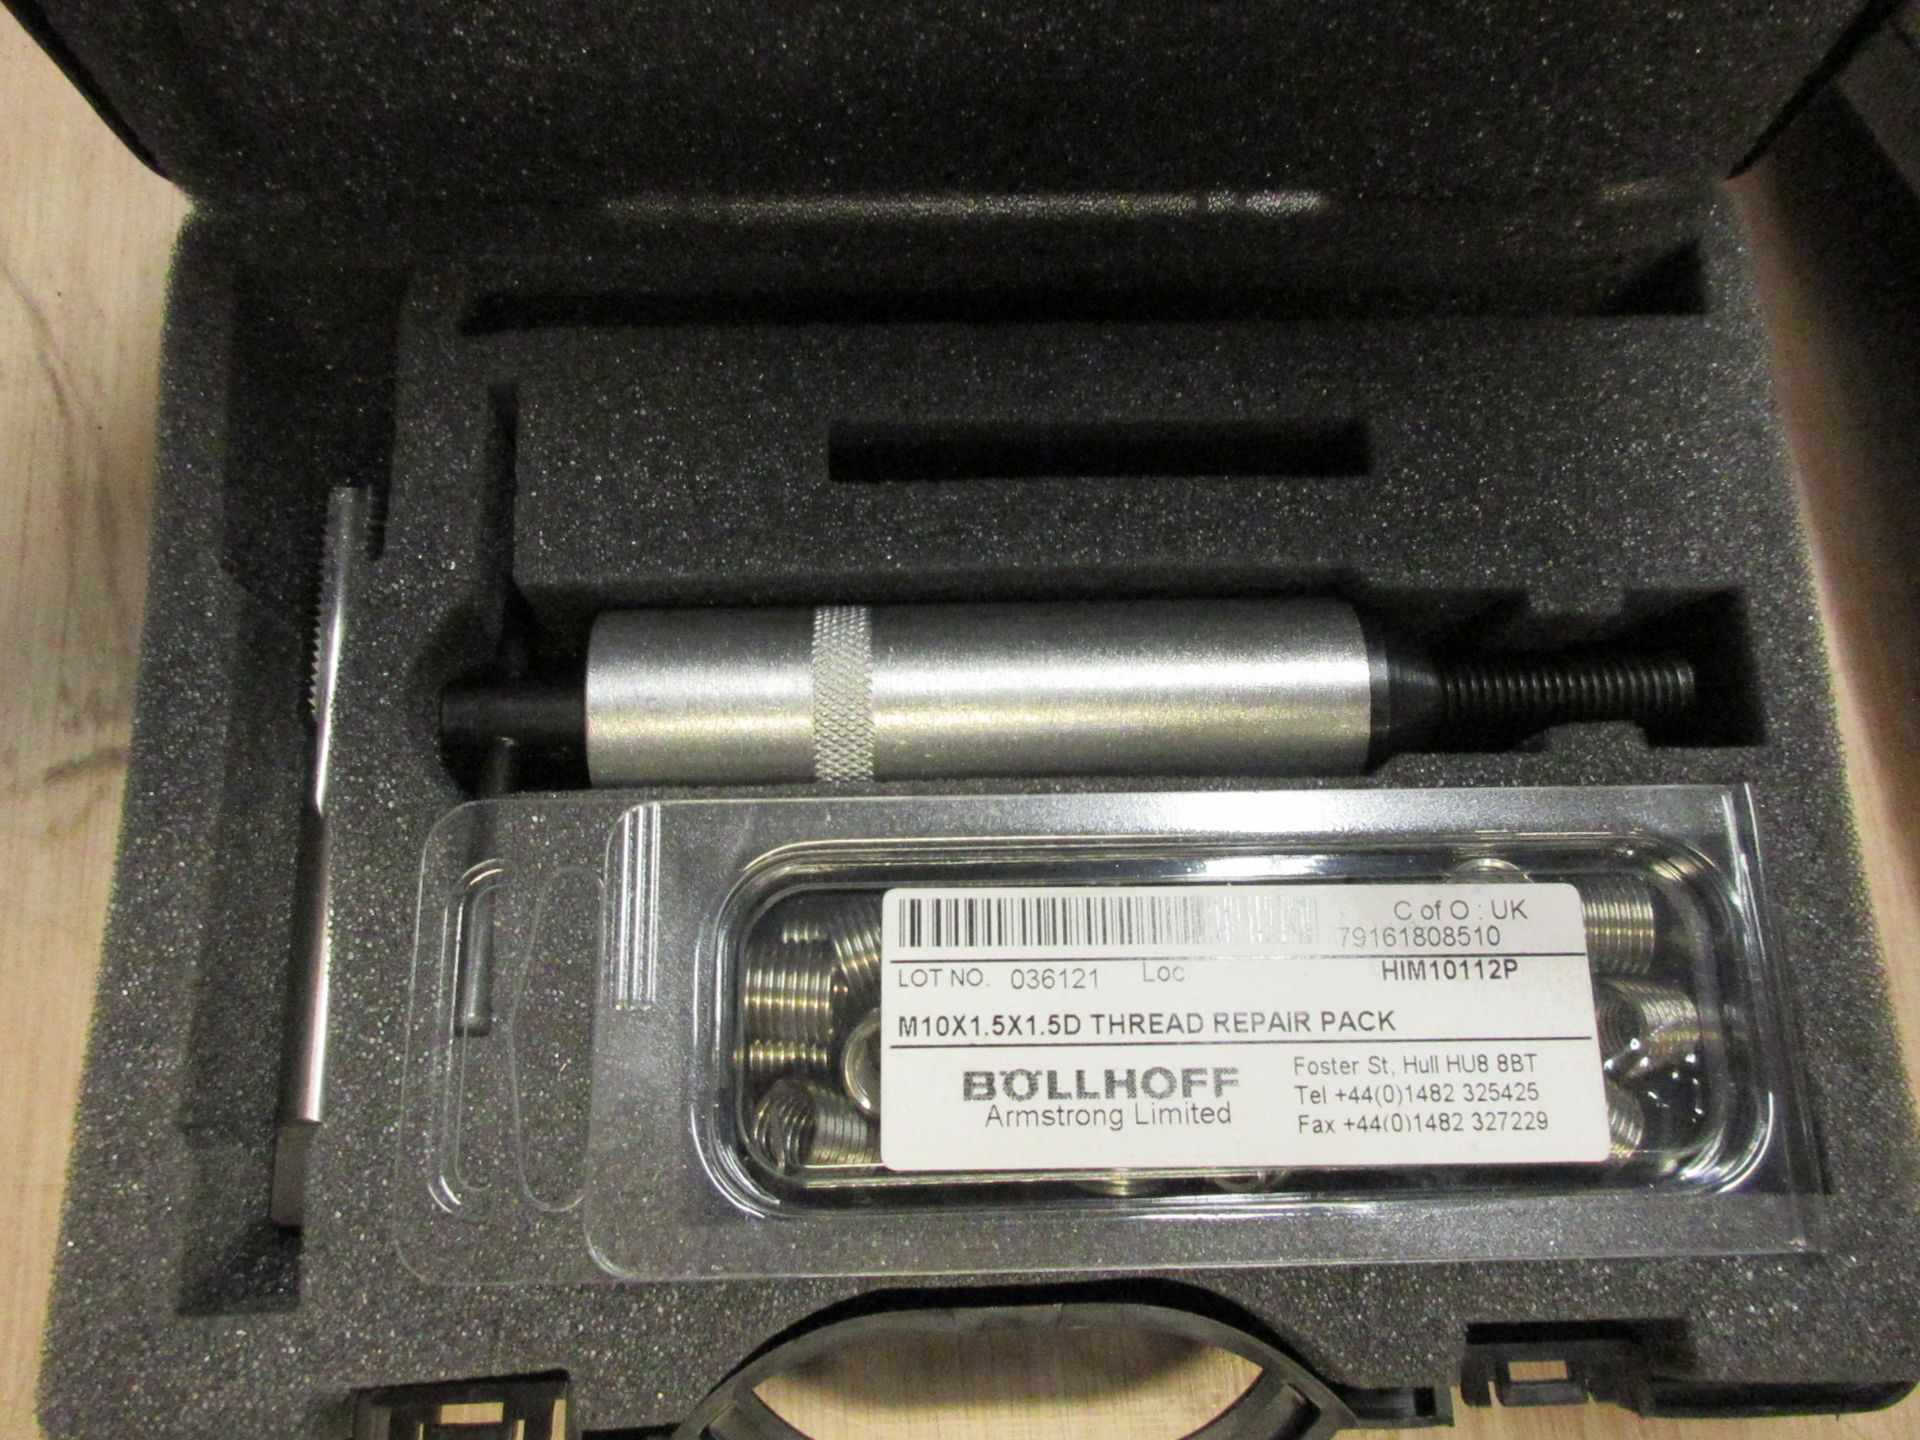 Helicoil thread repair kit & Salter TS-Spring balance - Image 2 of 3